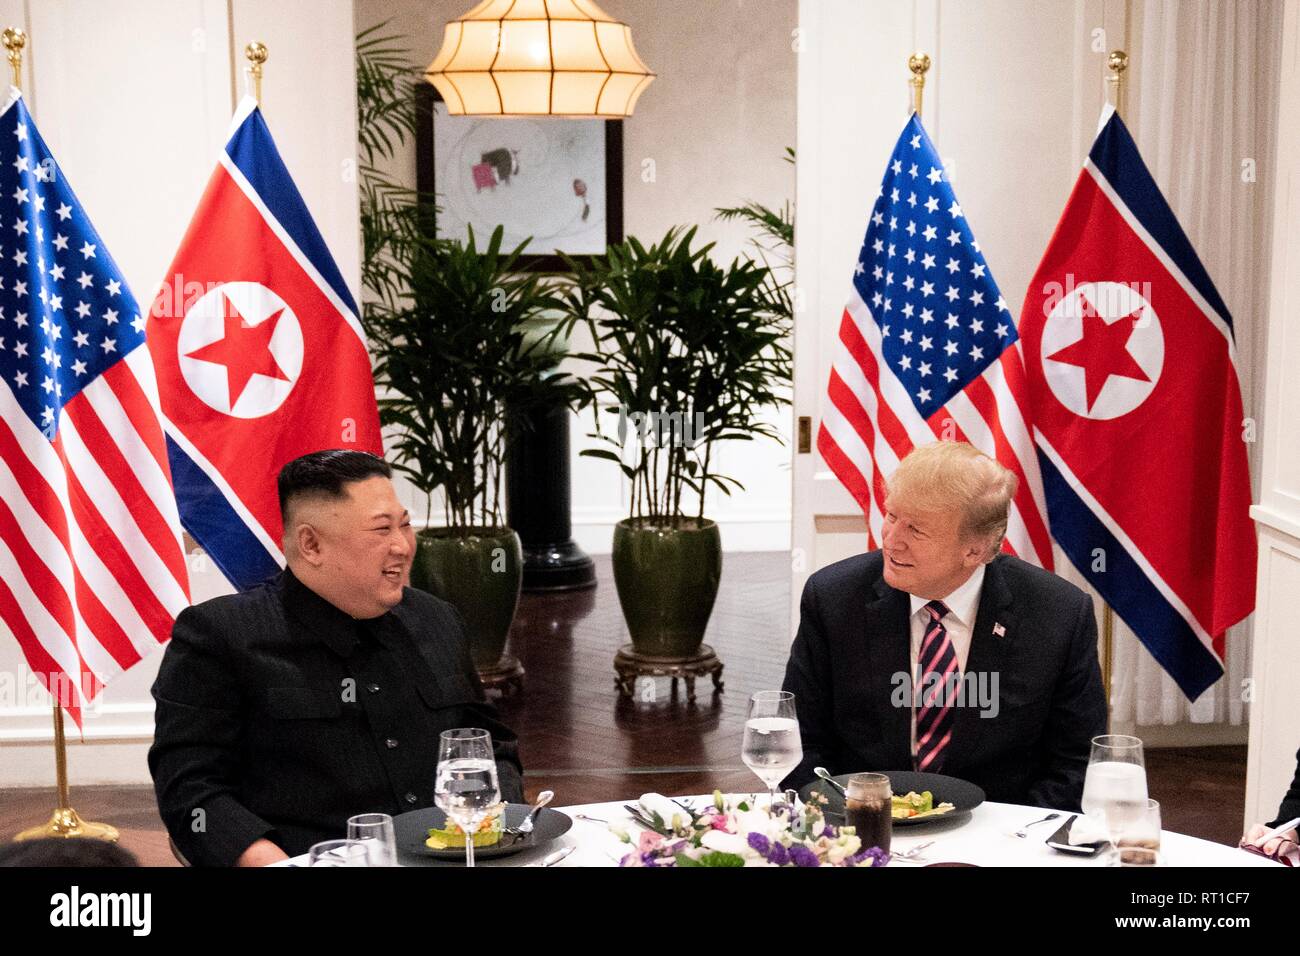 Hanoi, Vietnam. 27th Feb, 2019. U.S President Donald Trump and North Korean leader and Kim Jong Un sit together during a social dinner at the Sofitel Legend Metropole hotel February 27, 2019 in Hanoi, Vietnam. Credit: Planetpix/Alamy Live News Stock Photo